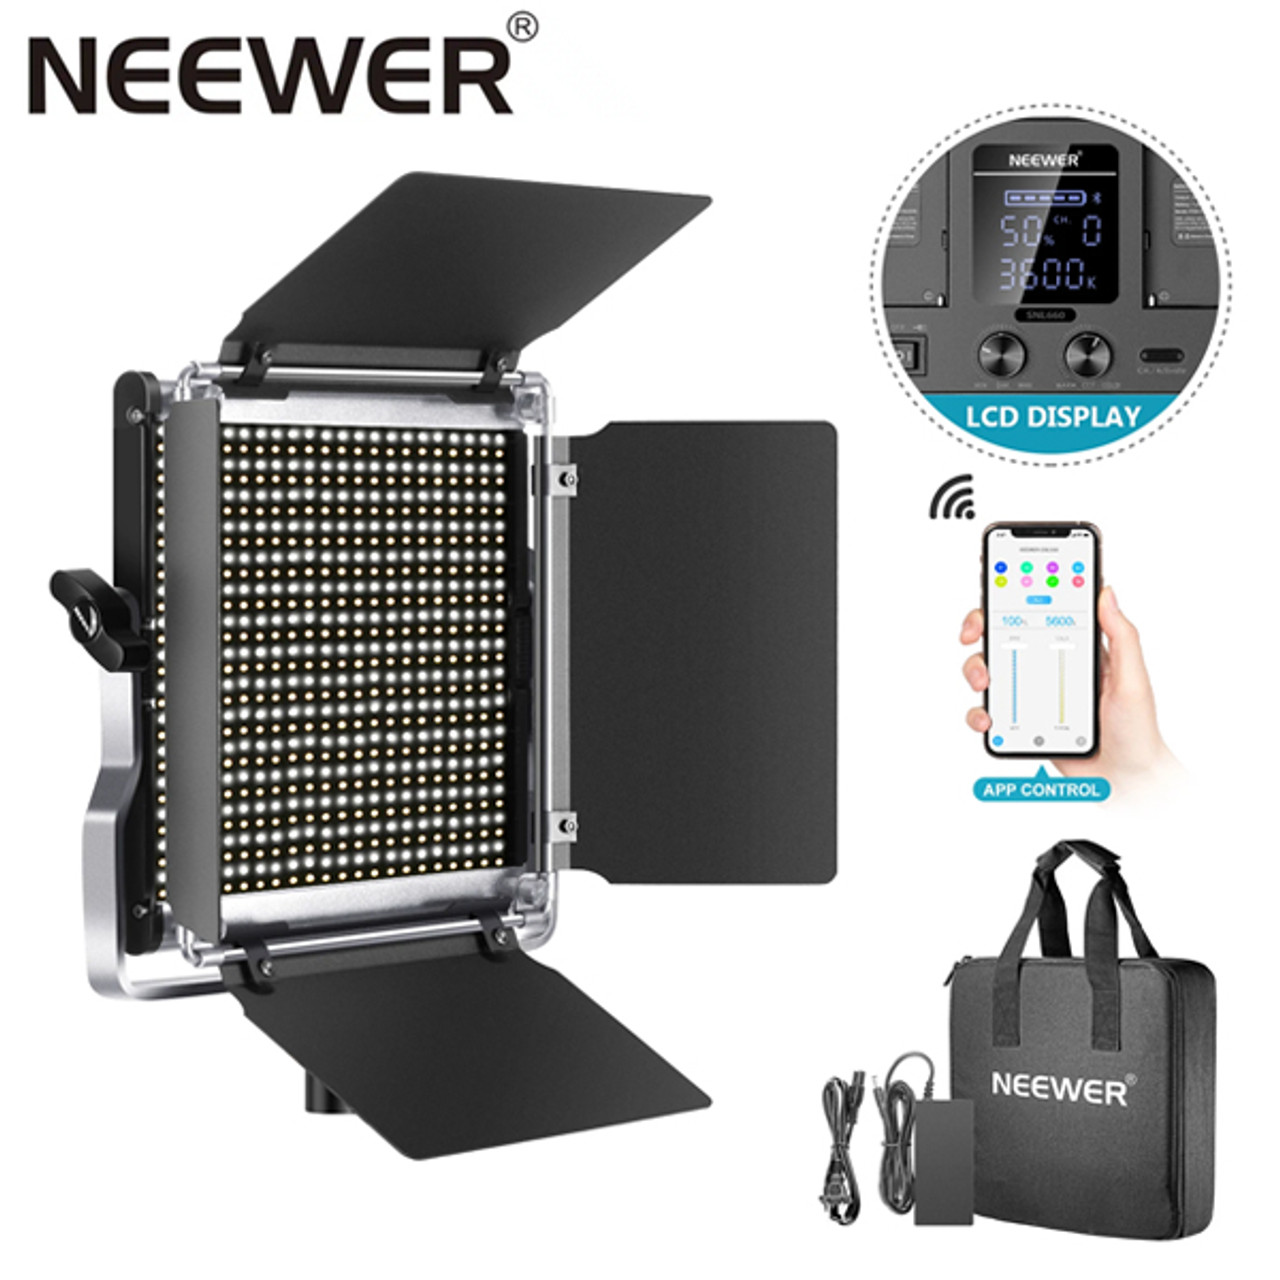 Neewer 2 Packs 660 LED Video Light APP Control Photography Video